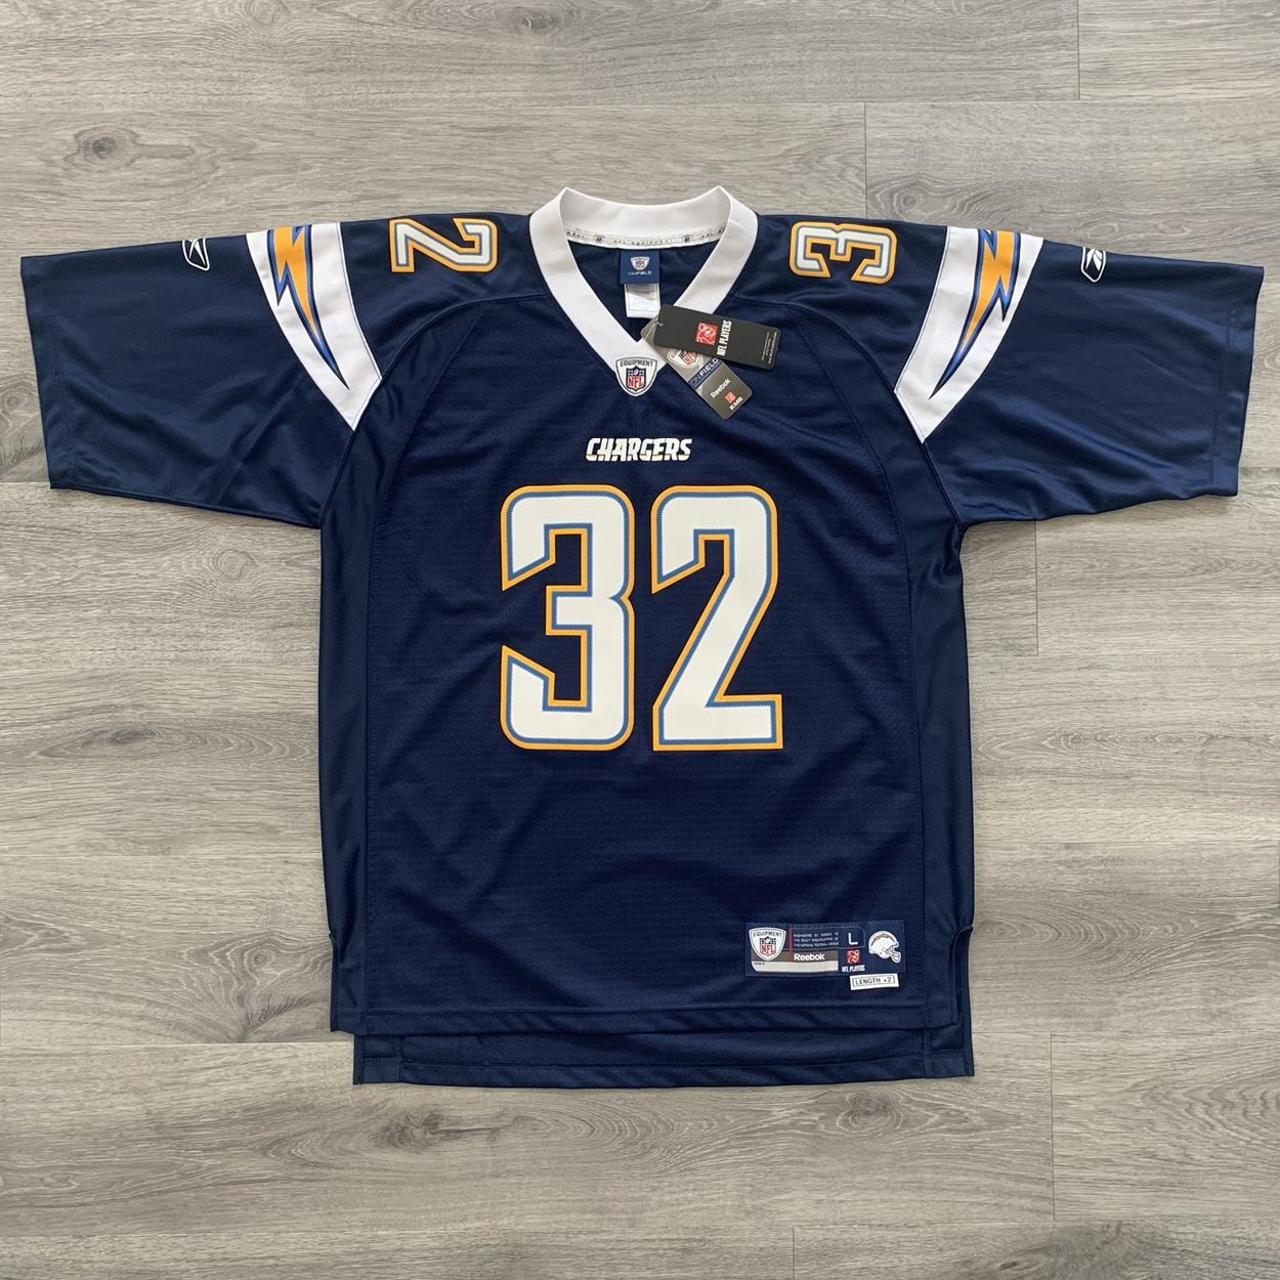 Reebok Eric Weddle San Diego Chargers Jersey for Sale in San